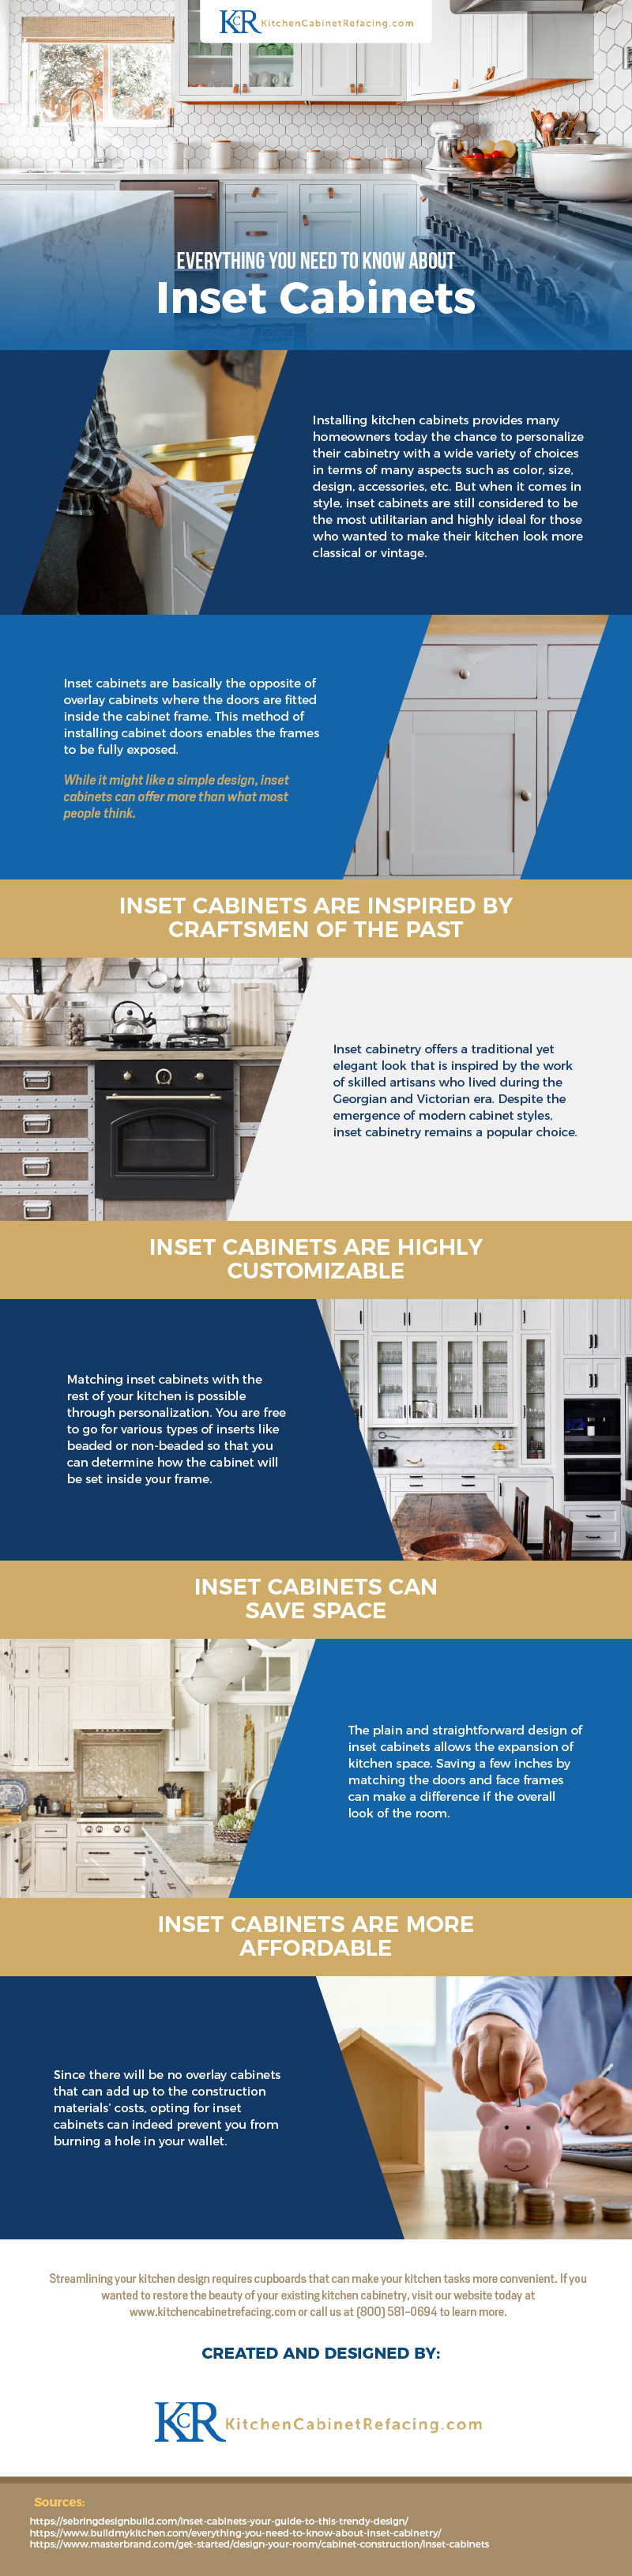 Everything You Need to Know About Inset Cabinets